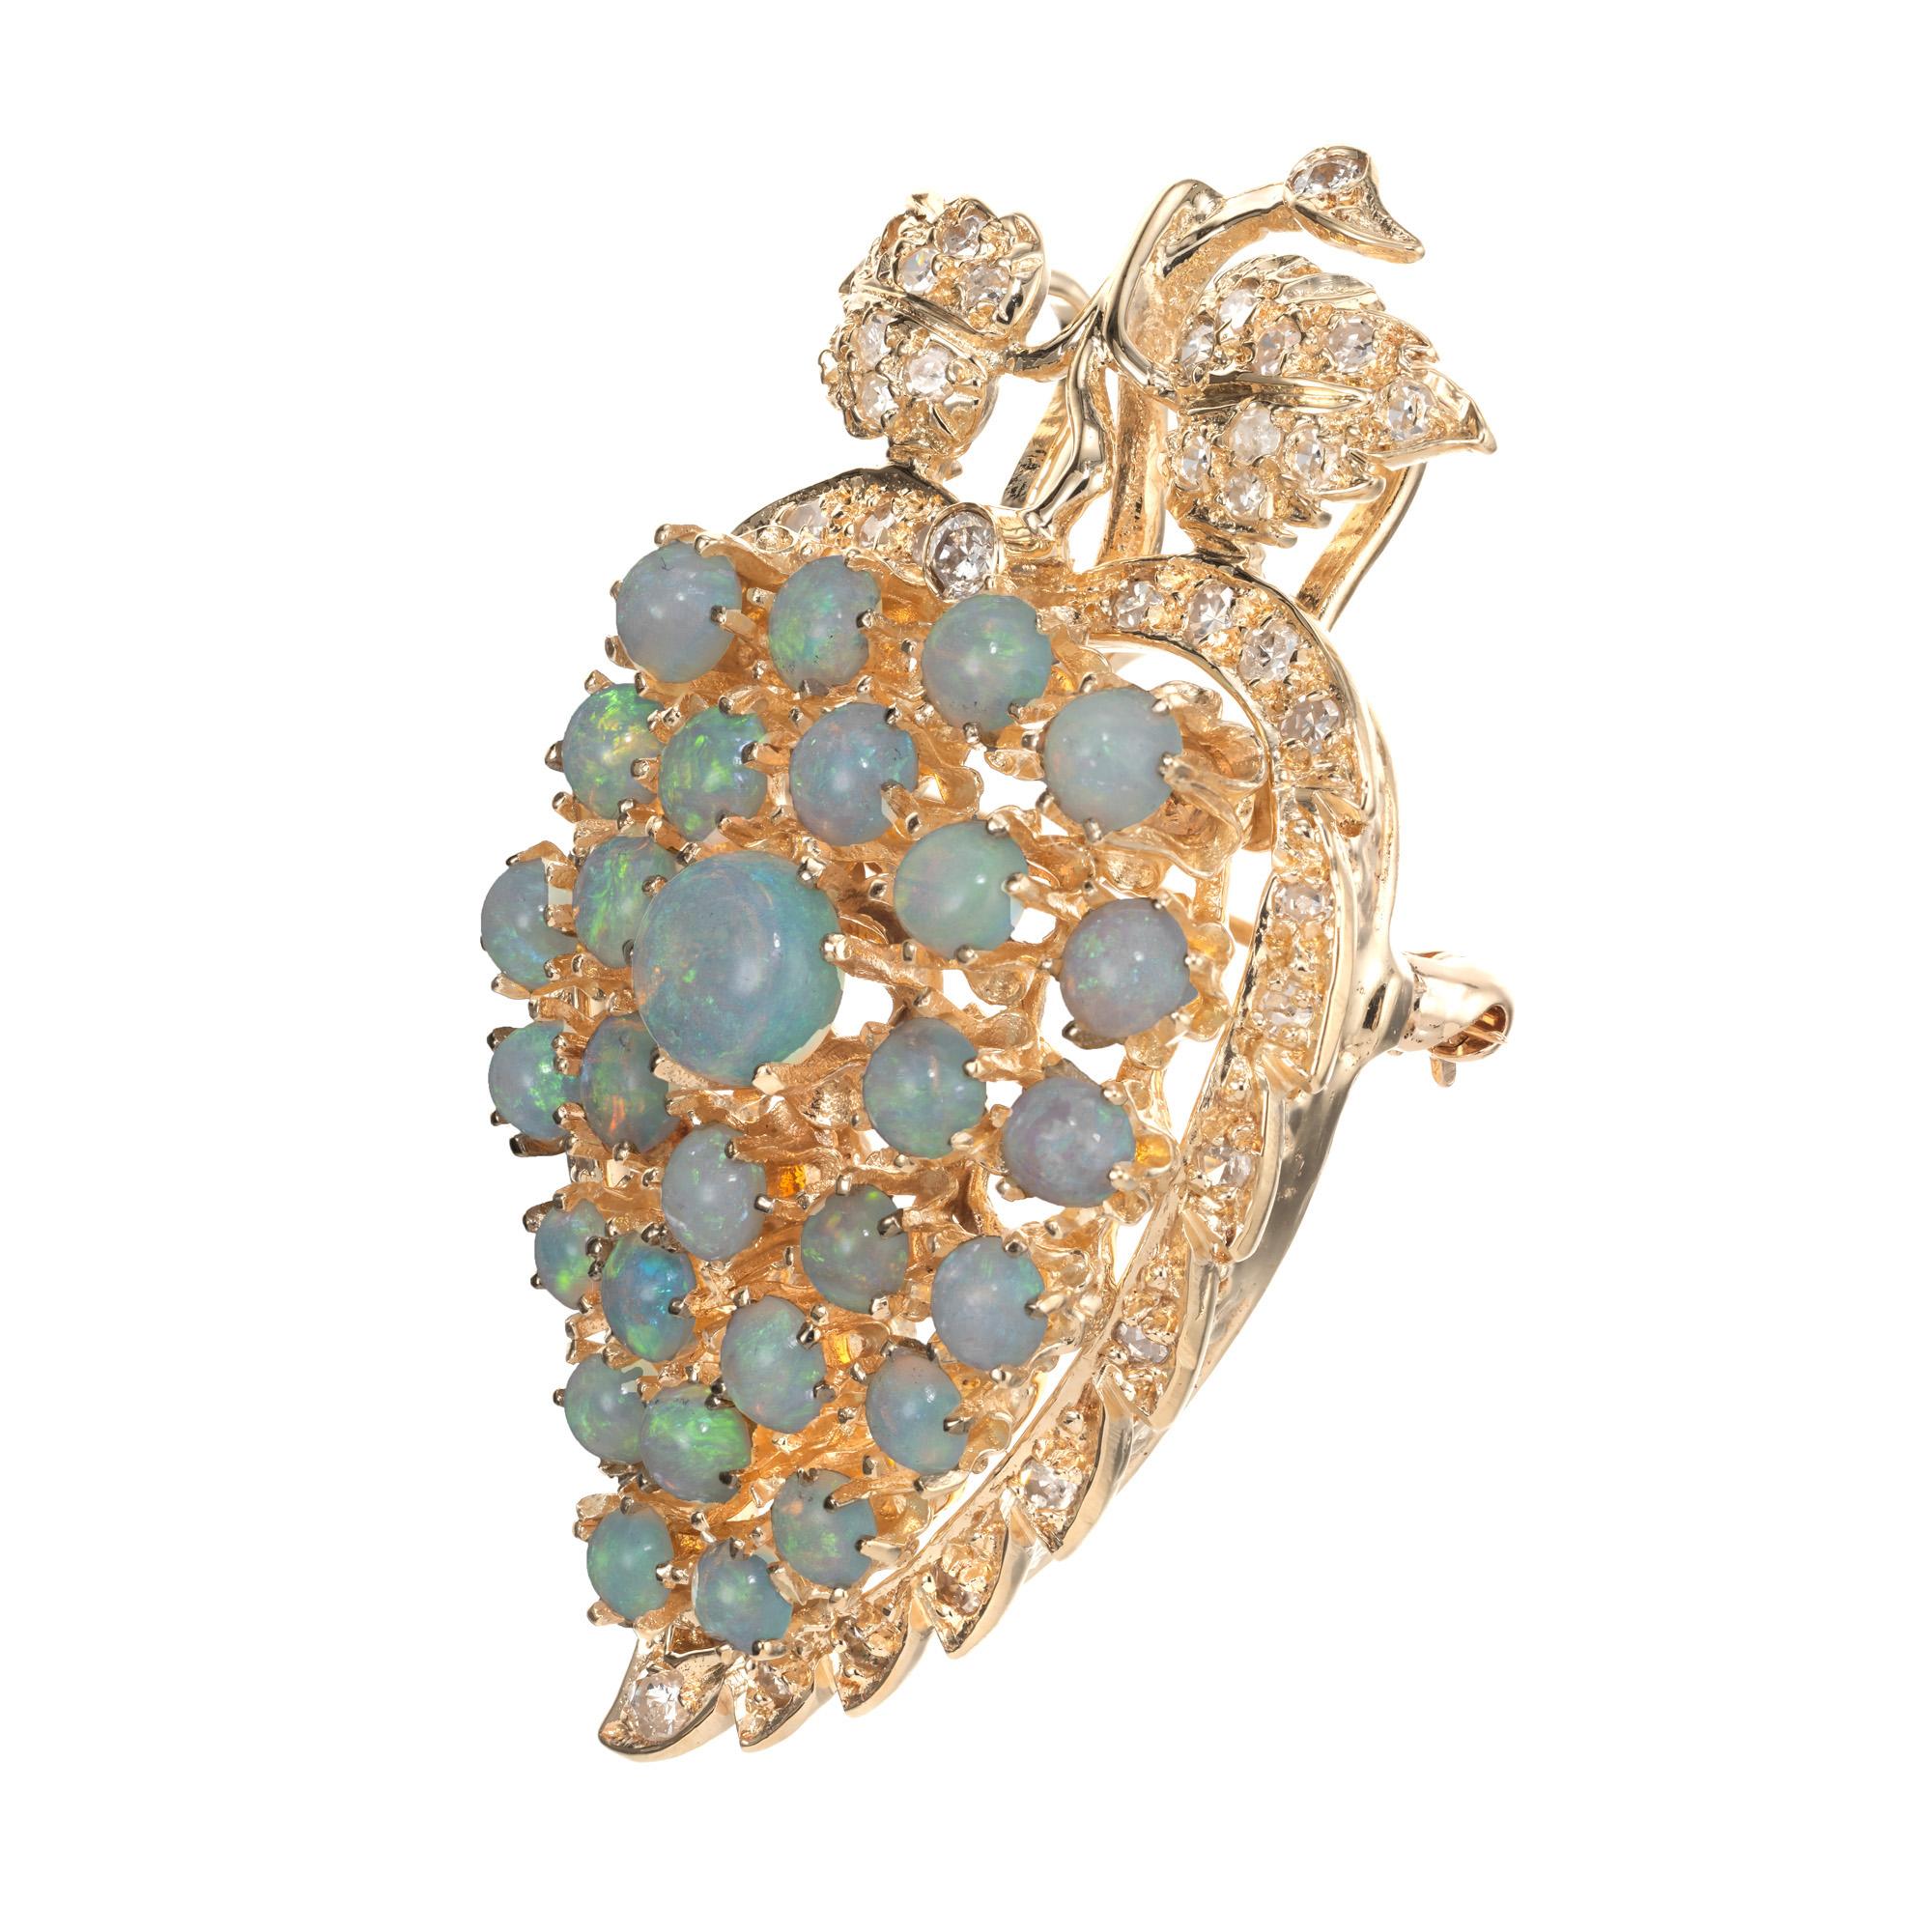 Beautiful 1960's opal and diamond brooch. 28 varying in size, round bluish green fiery cabochon opals set in a 14k yellow gold grape leaf design that can be worn as a brooch or pendant. The opals are accented with 43 round cut diamonds.  

28 bluish